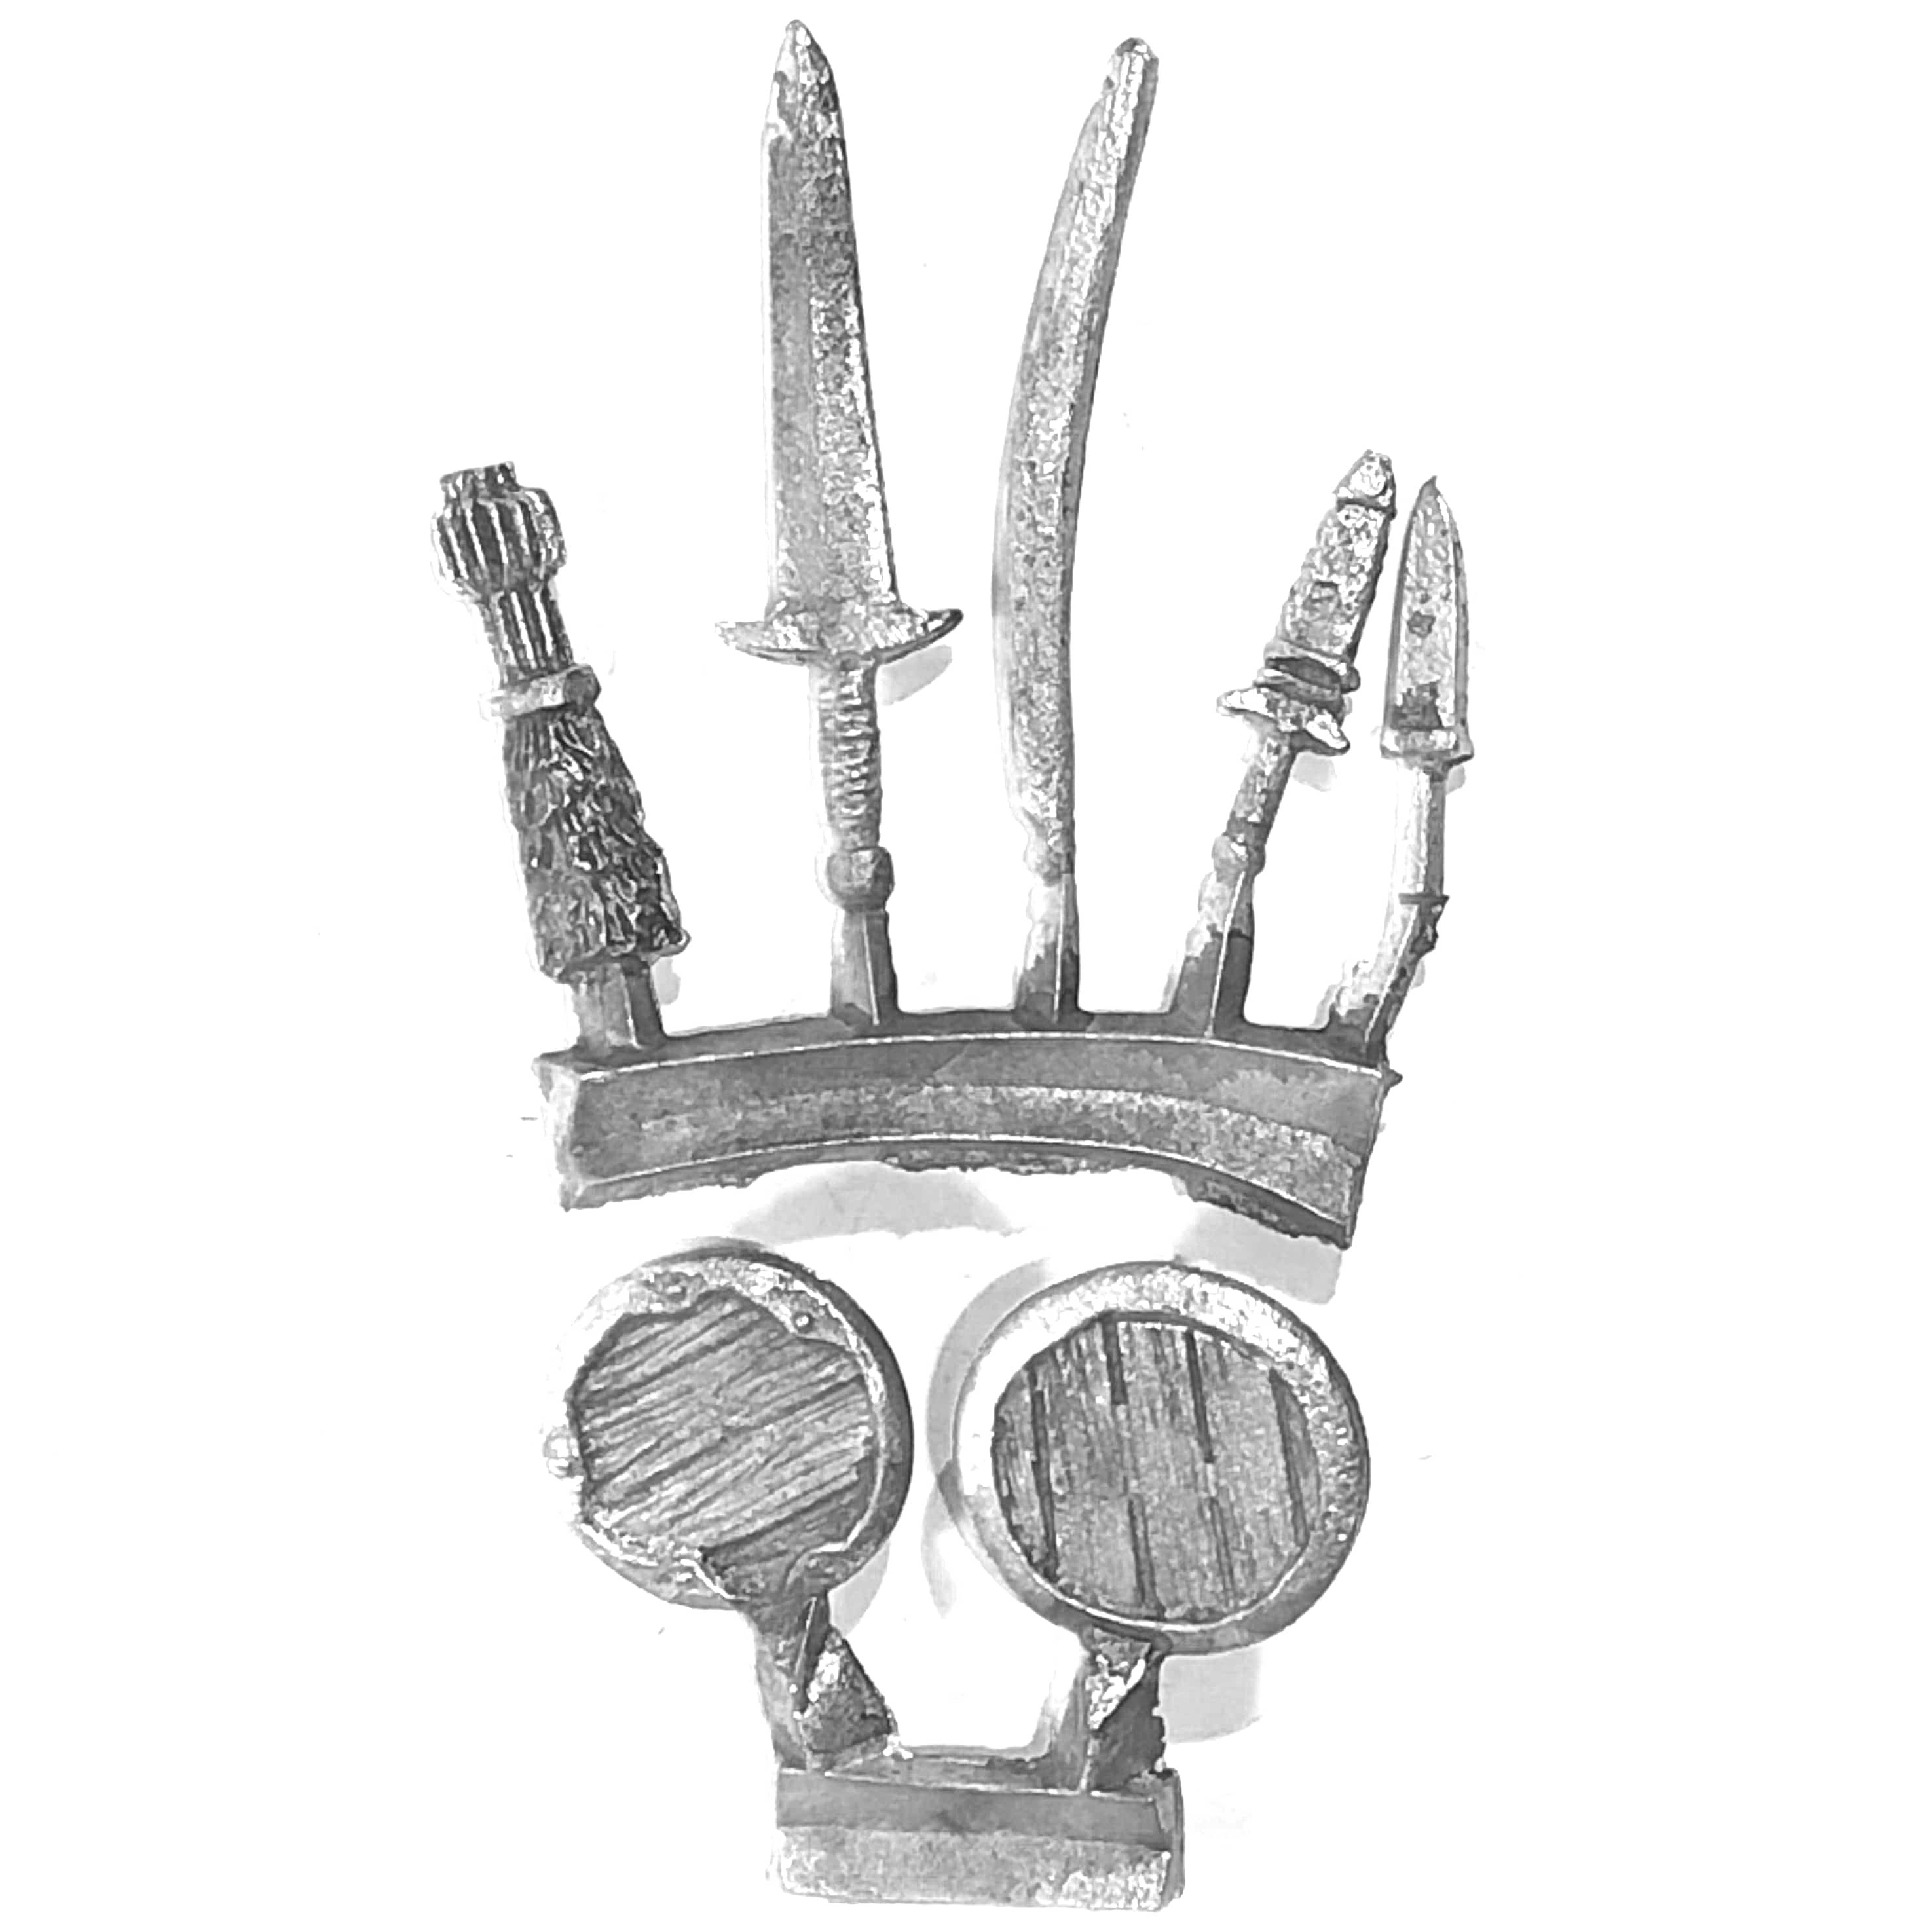 Hand Weapons, Bow and Shields